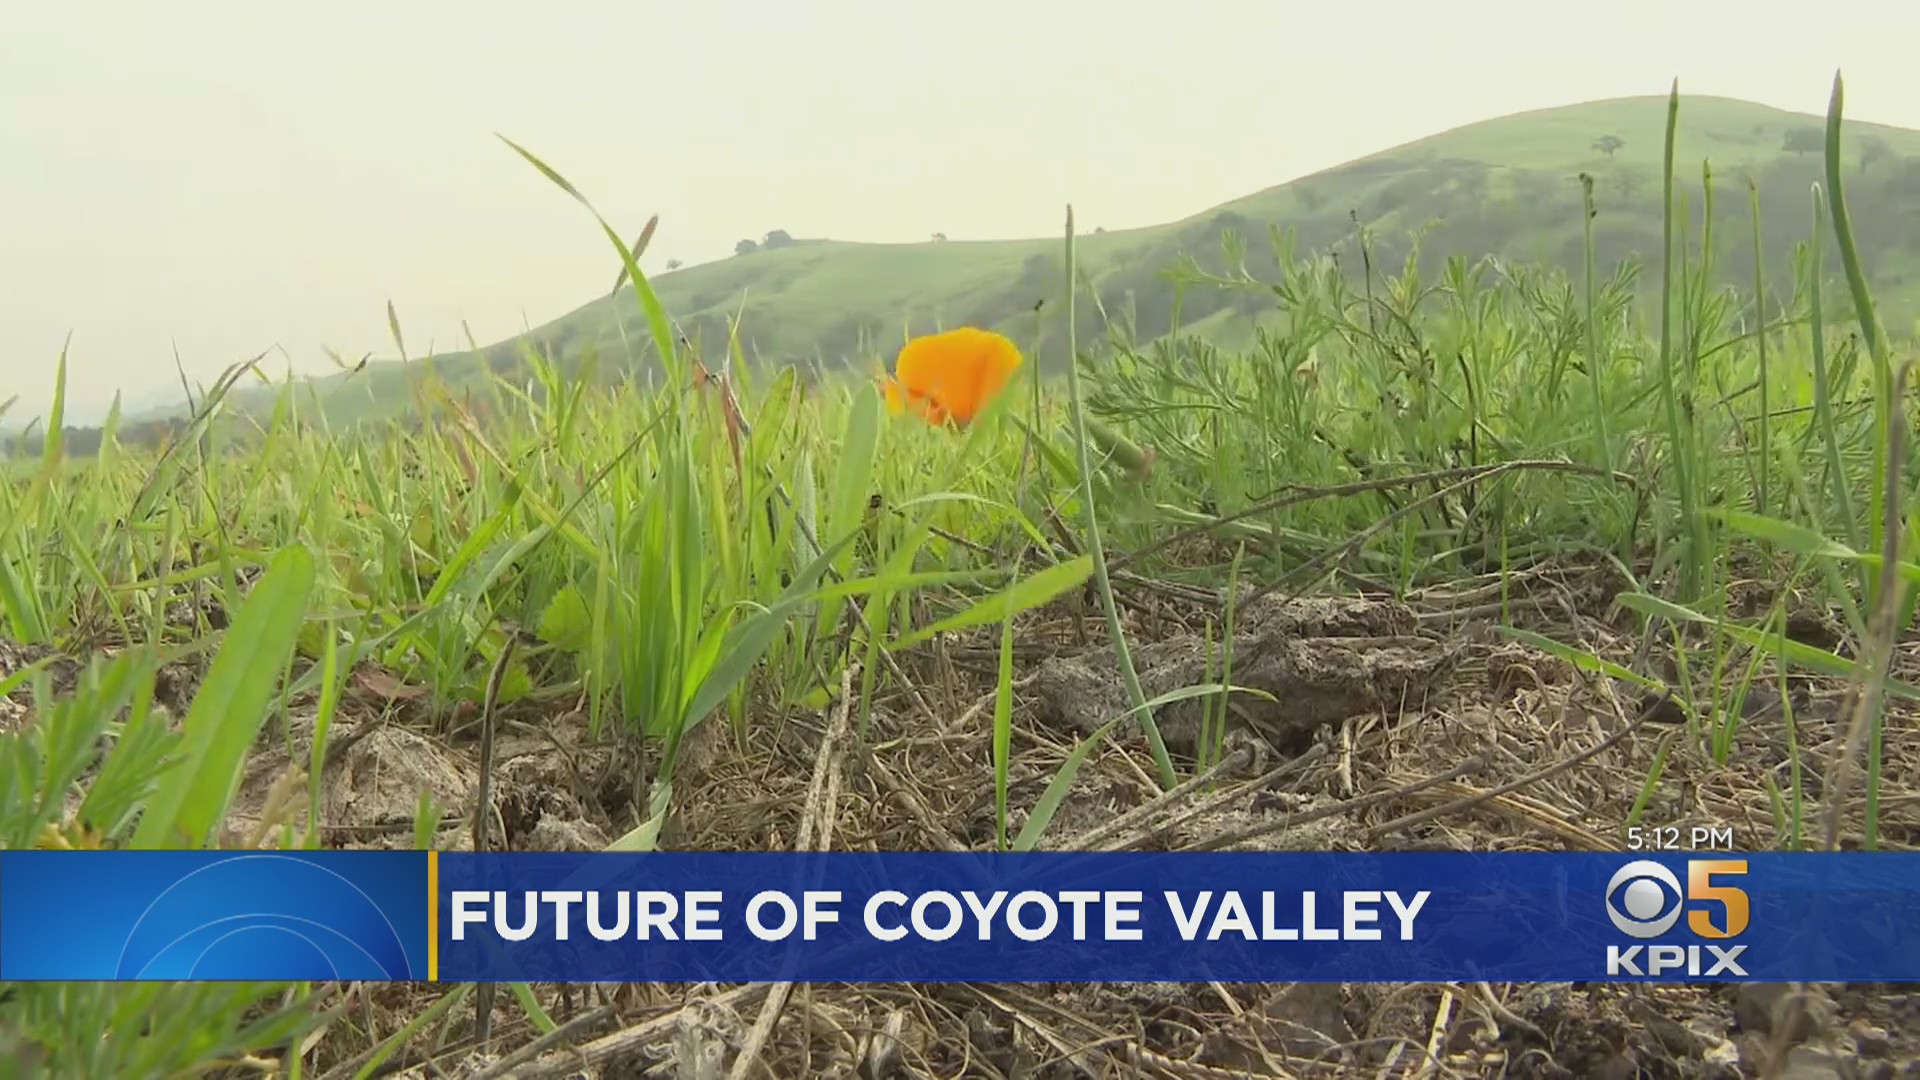 Developers, Conservationists At Odds Over Future Of Coyote Valley In San Jose